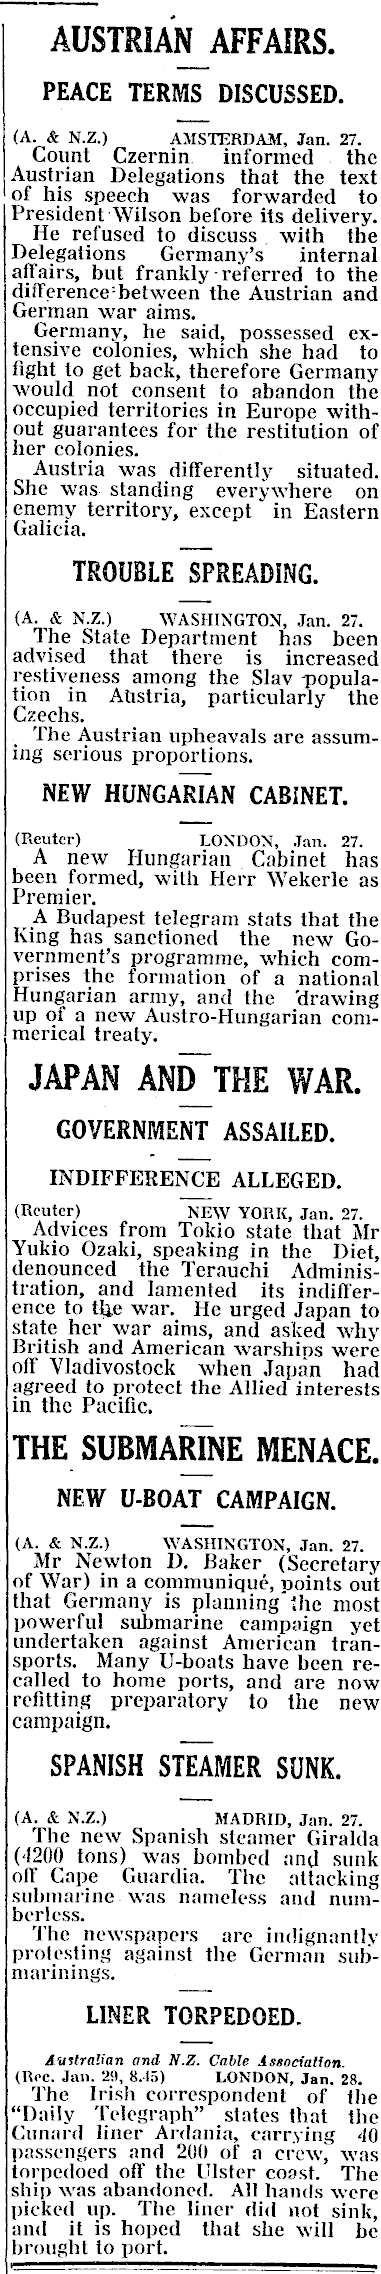 Papers Past Newspapers Sun 29 January 1918 Position Of